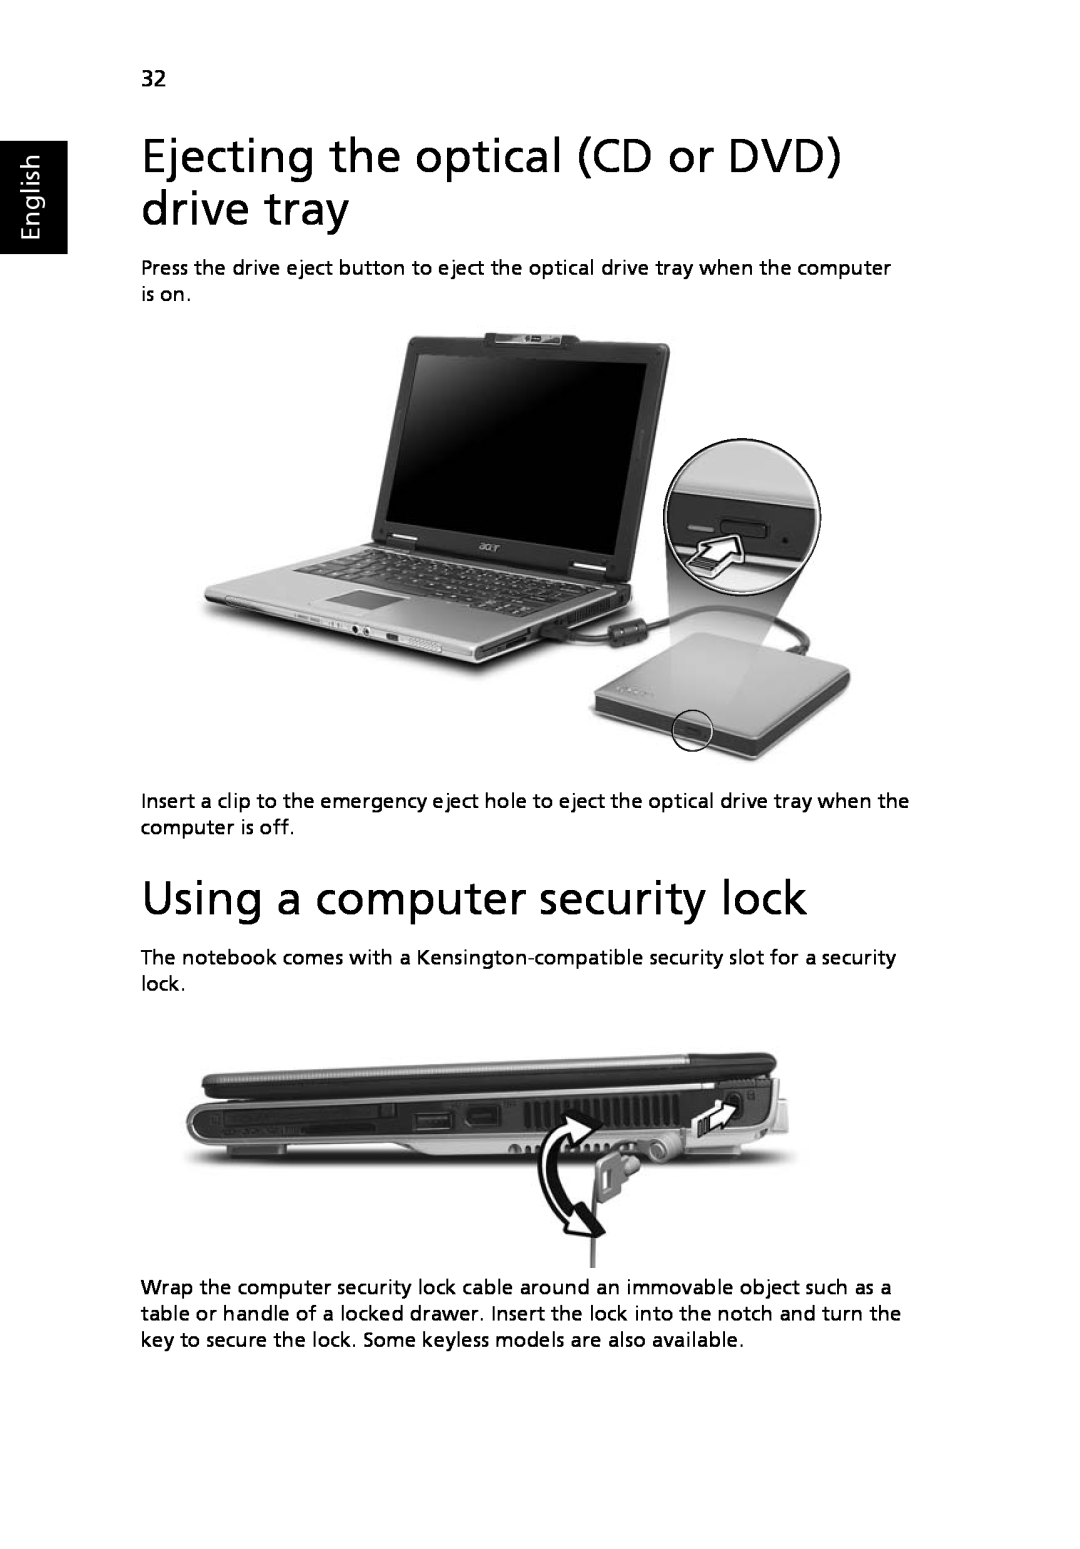 Acer 3030 Series, 3040 Series manual Ejecting the optical CD or DVD drive tray, Using a computer security lock, English 